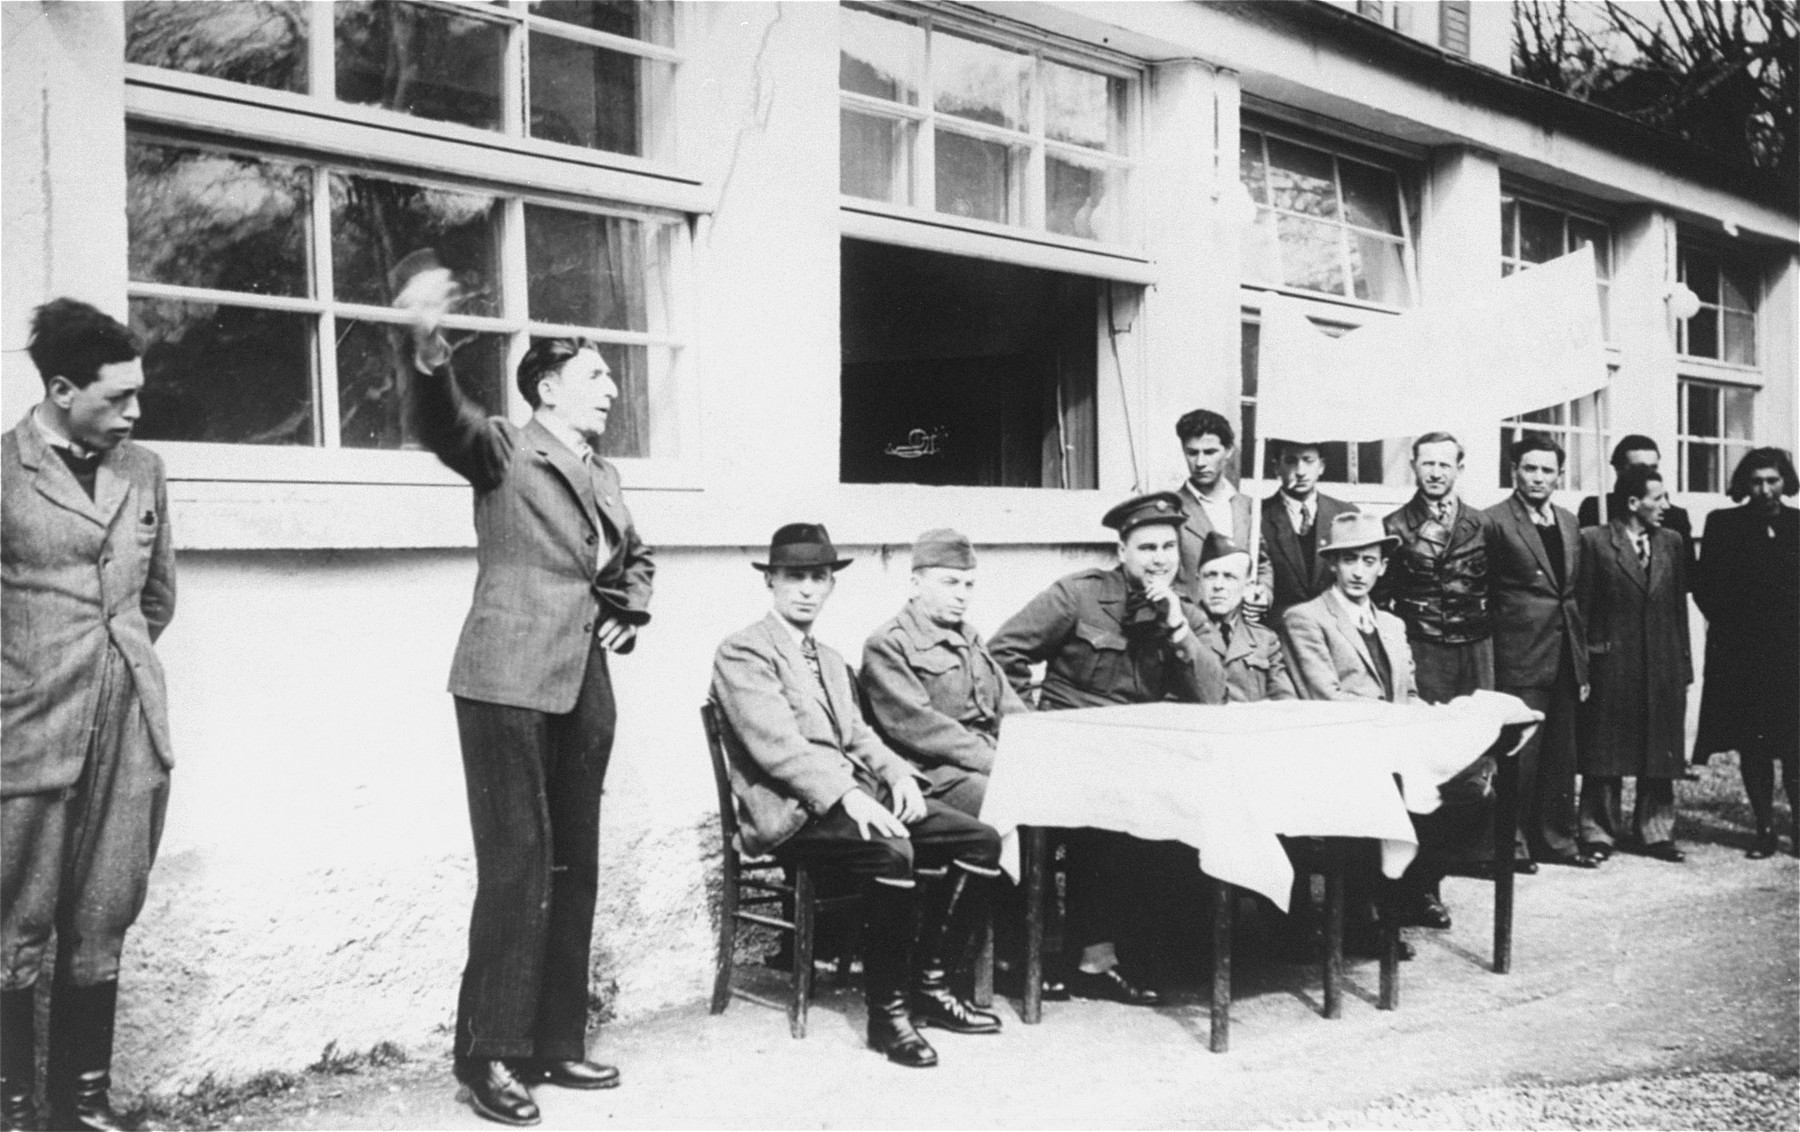 Jewish DPs in the Mittenwald displaced persons camp conduct a meeting at which they protest British immigration policy to Palestine while they commemorate the death march from Dachau to Tyrol.

Among the participants is Mr. Spier, an UNRRA representative.